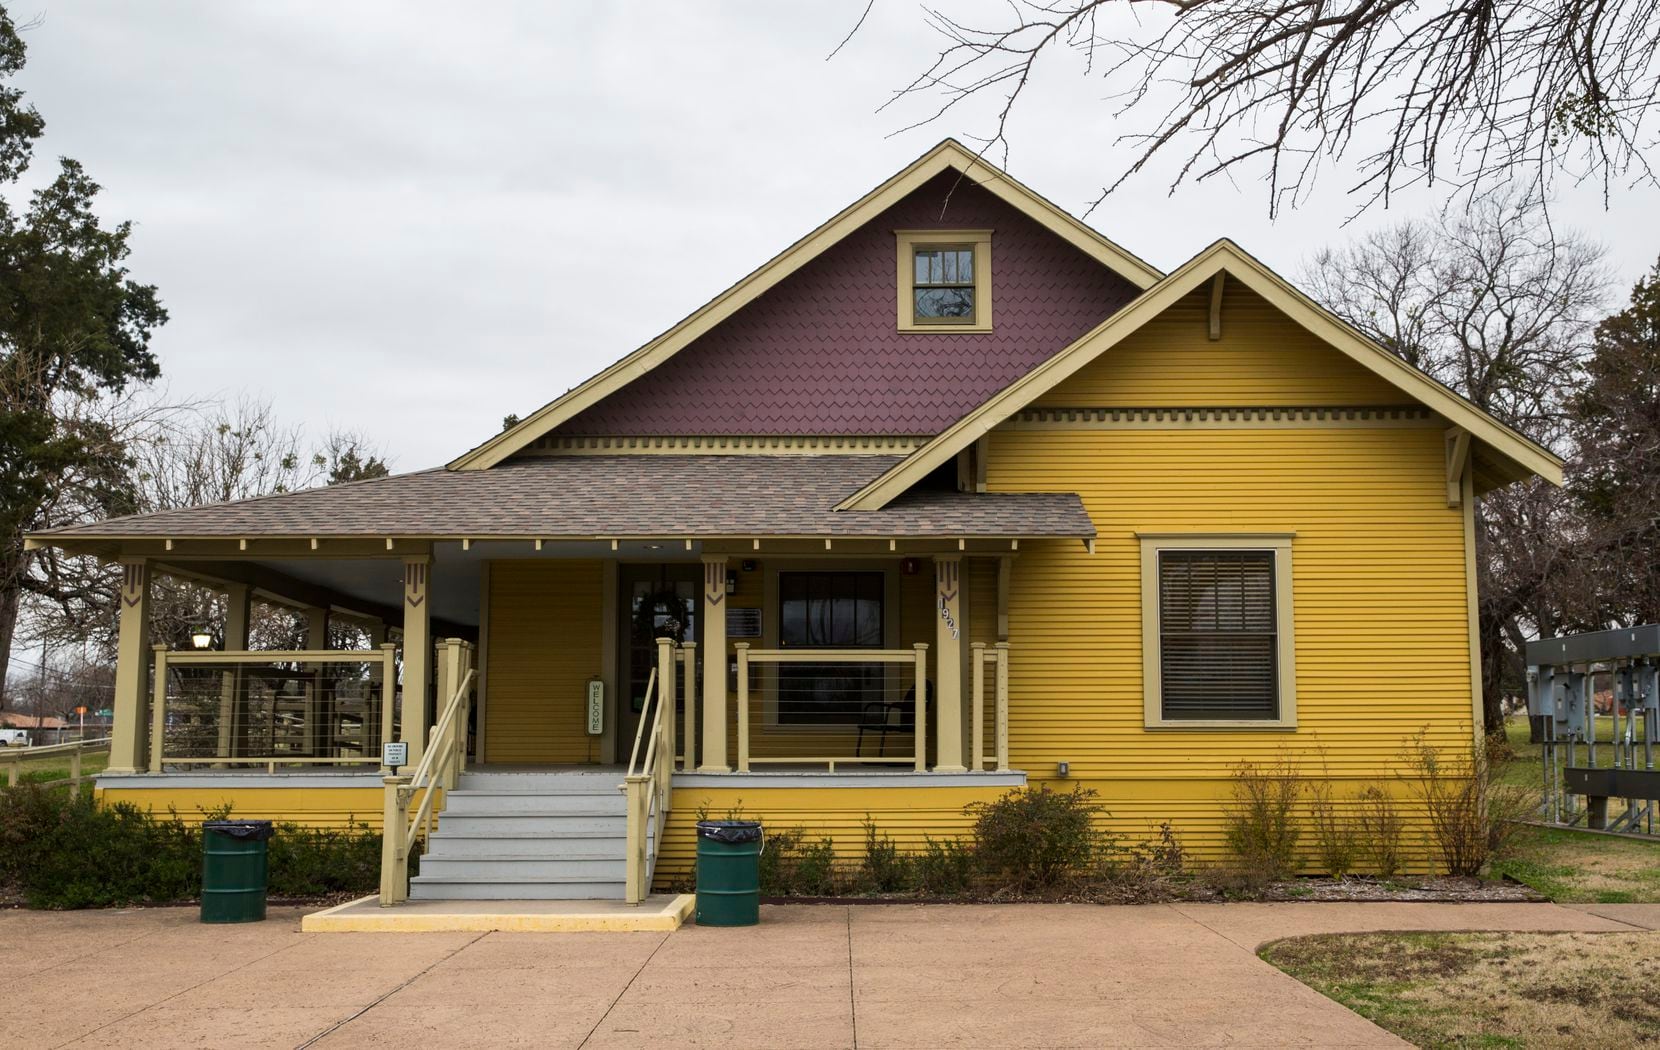 The Noah Range Farmhouse, a turn-of-the-century arts-and-crafts bungalow, is one of about a half dozen historic buildings at Opal Lawrence Historical Park.